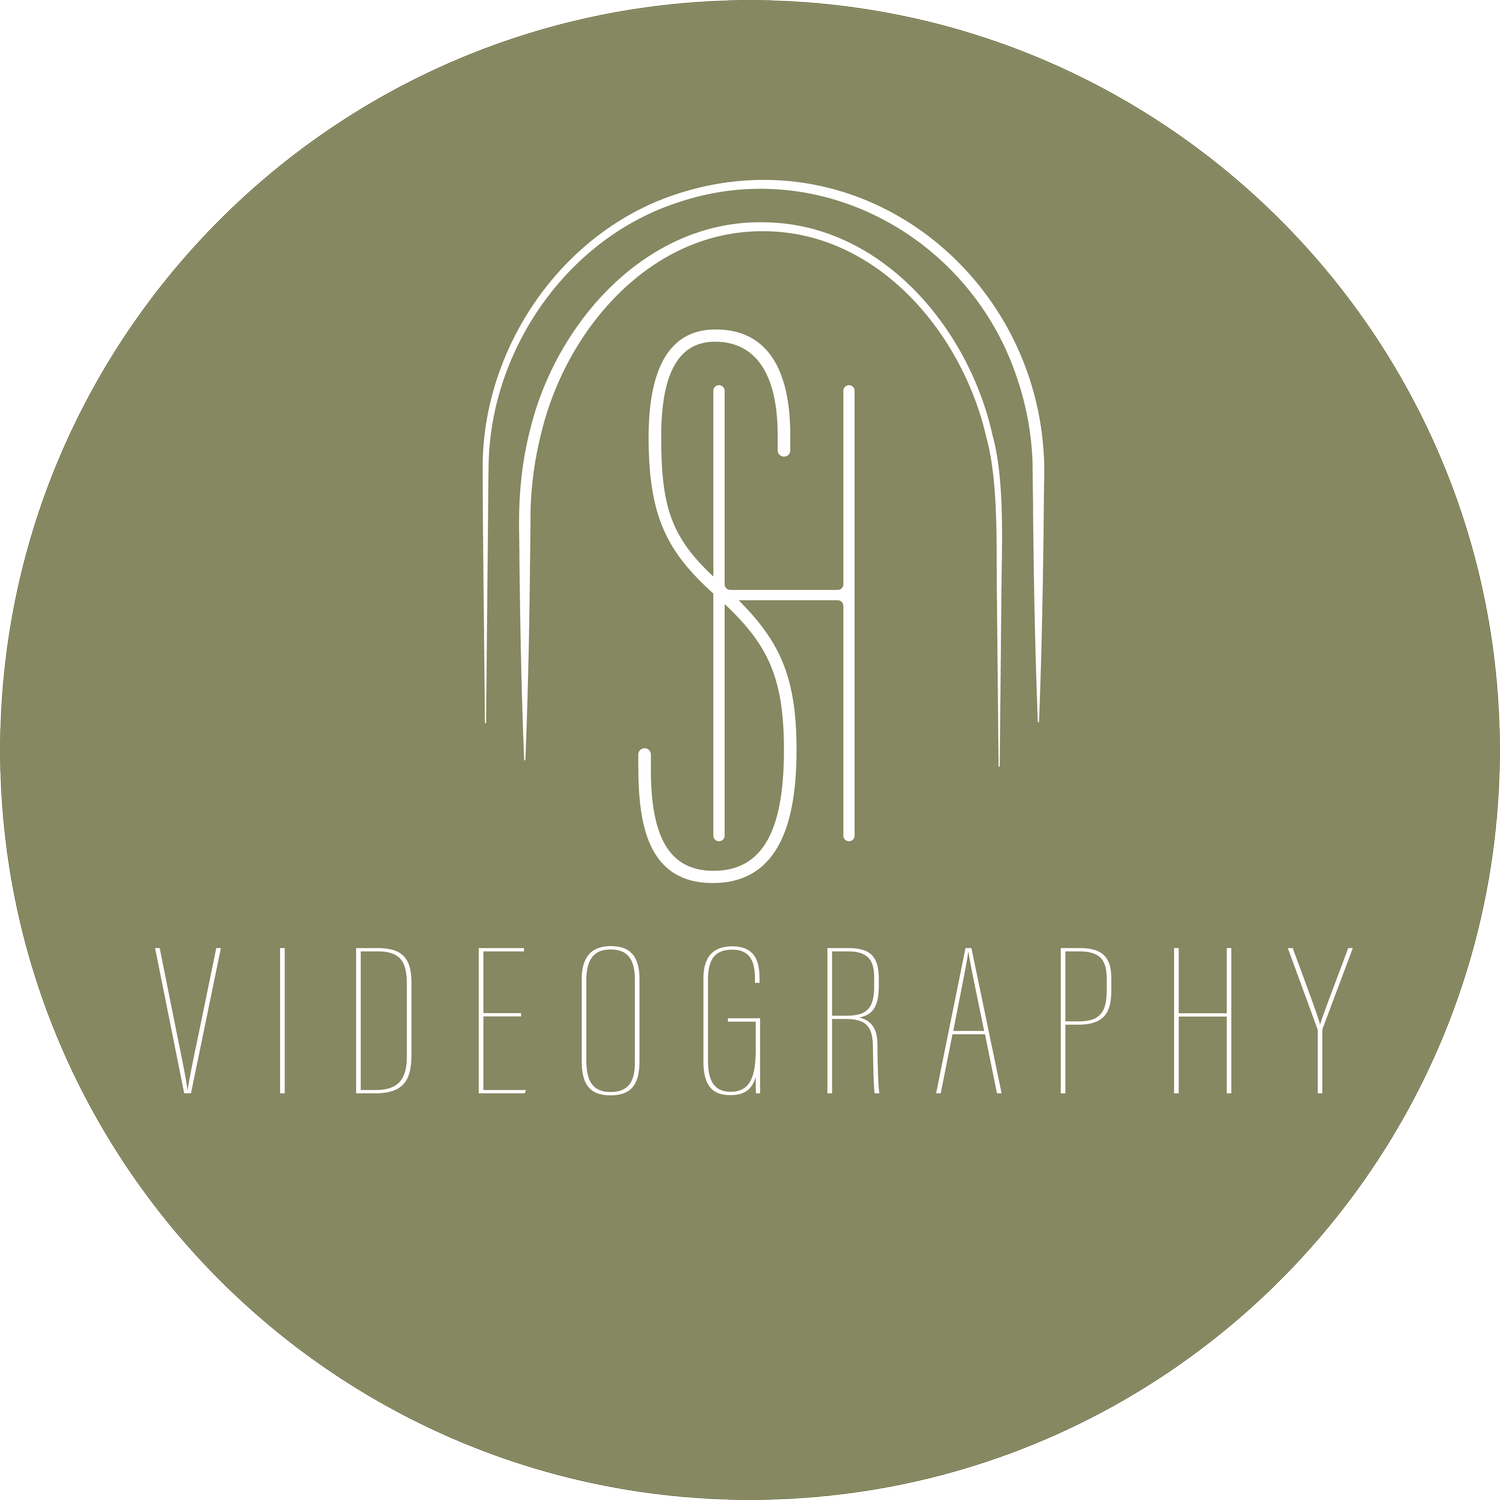 S.H. Videography